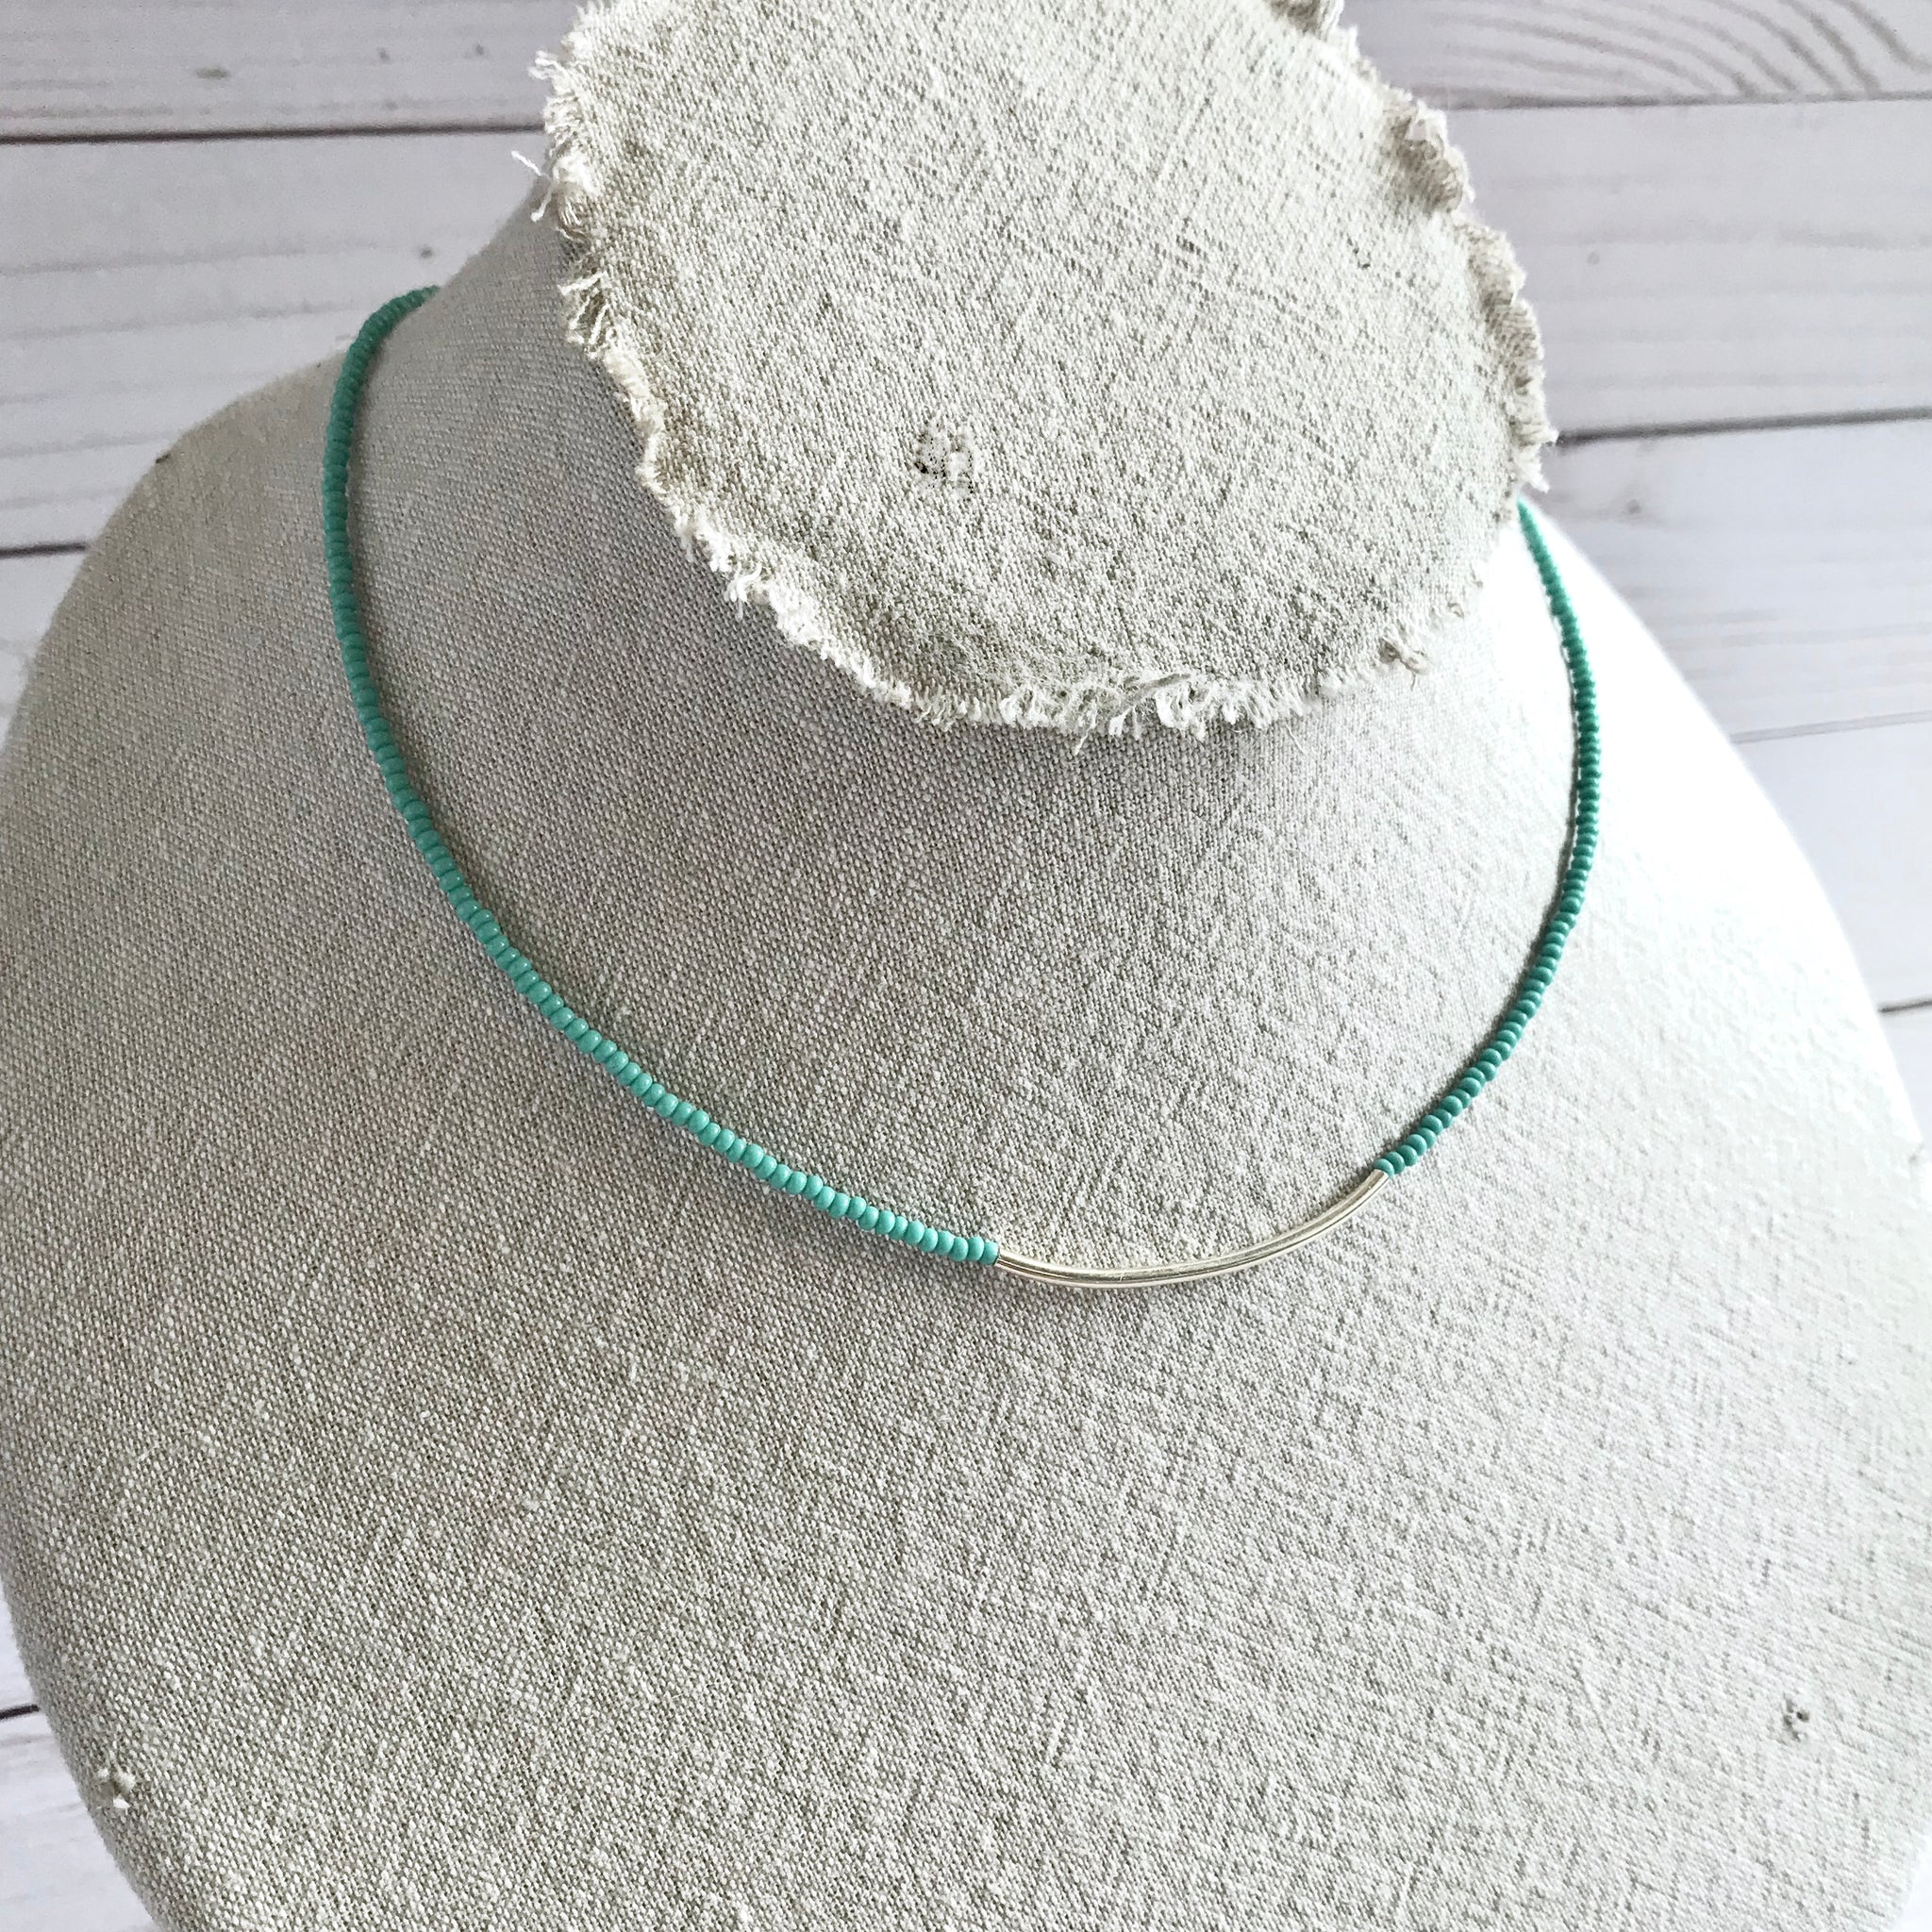 Sterling Silver Tube Necklace (Turquoise or Sand)